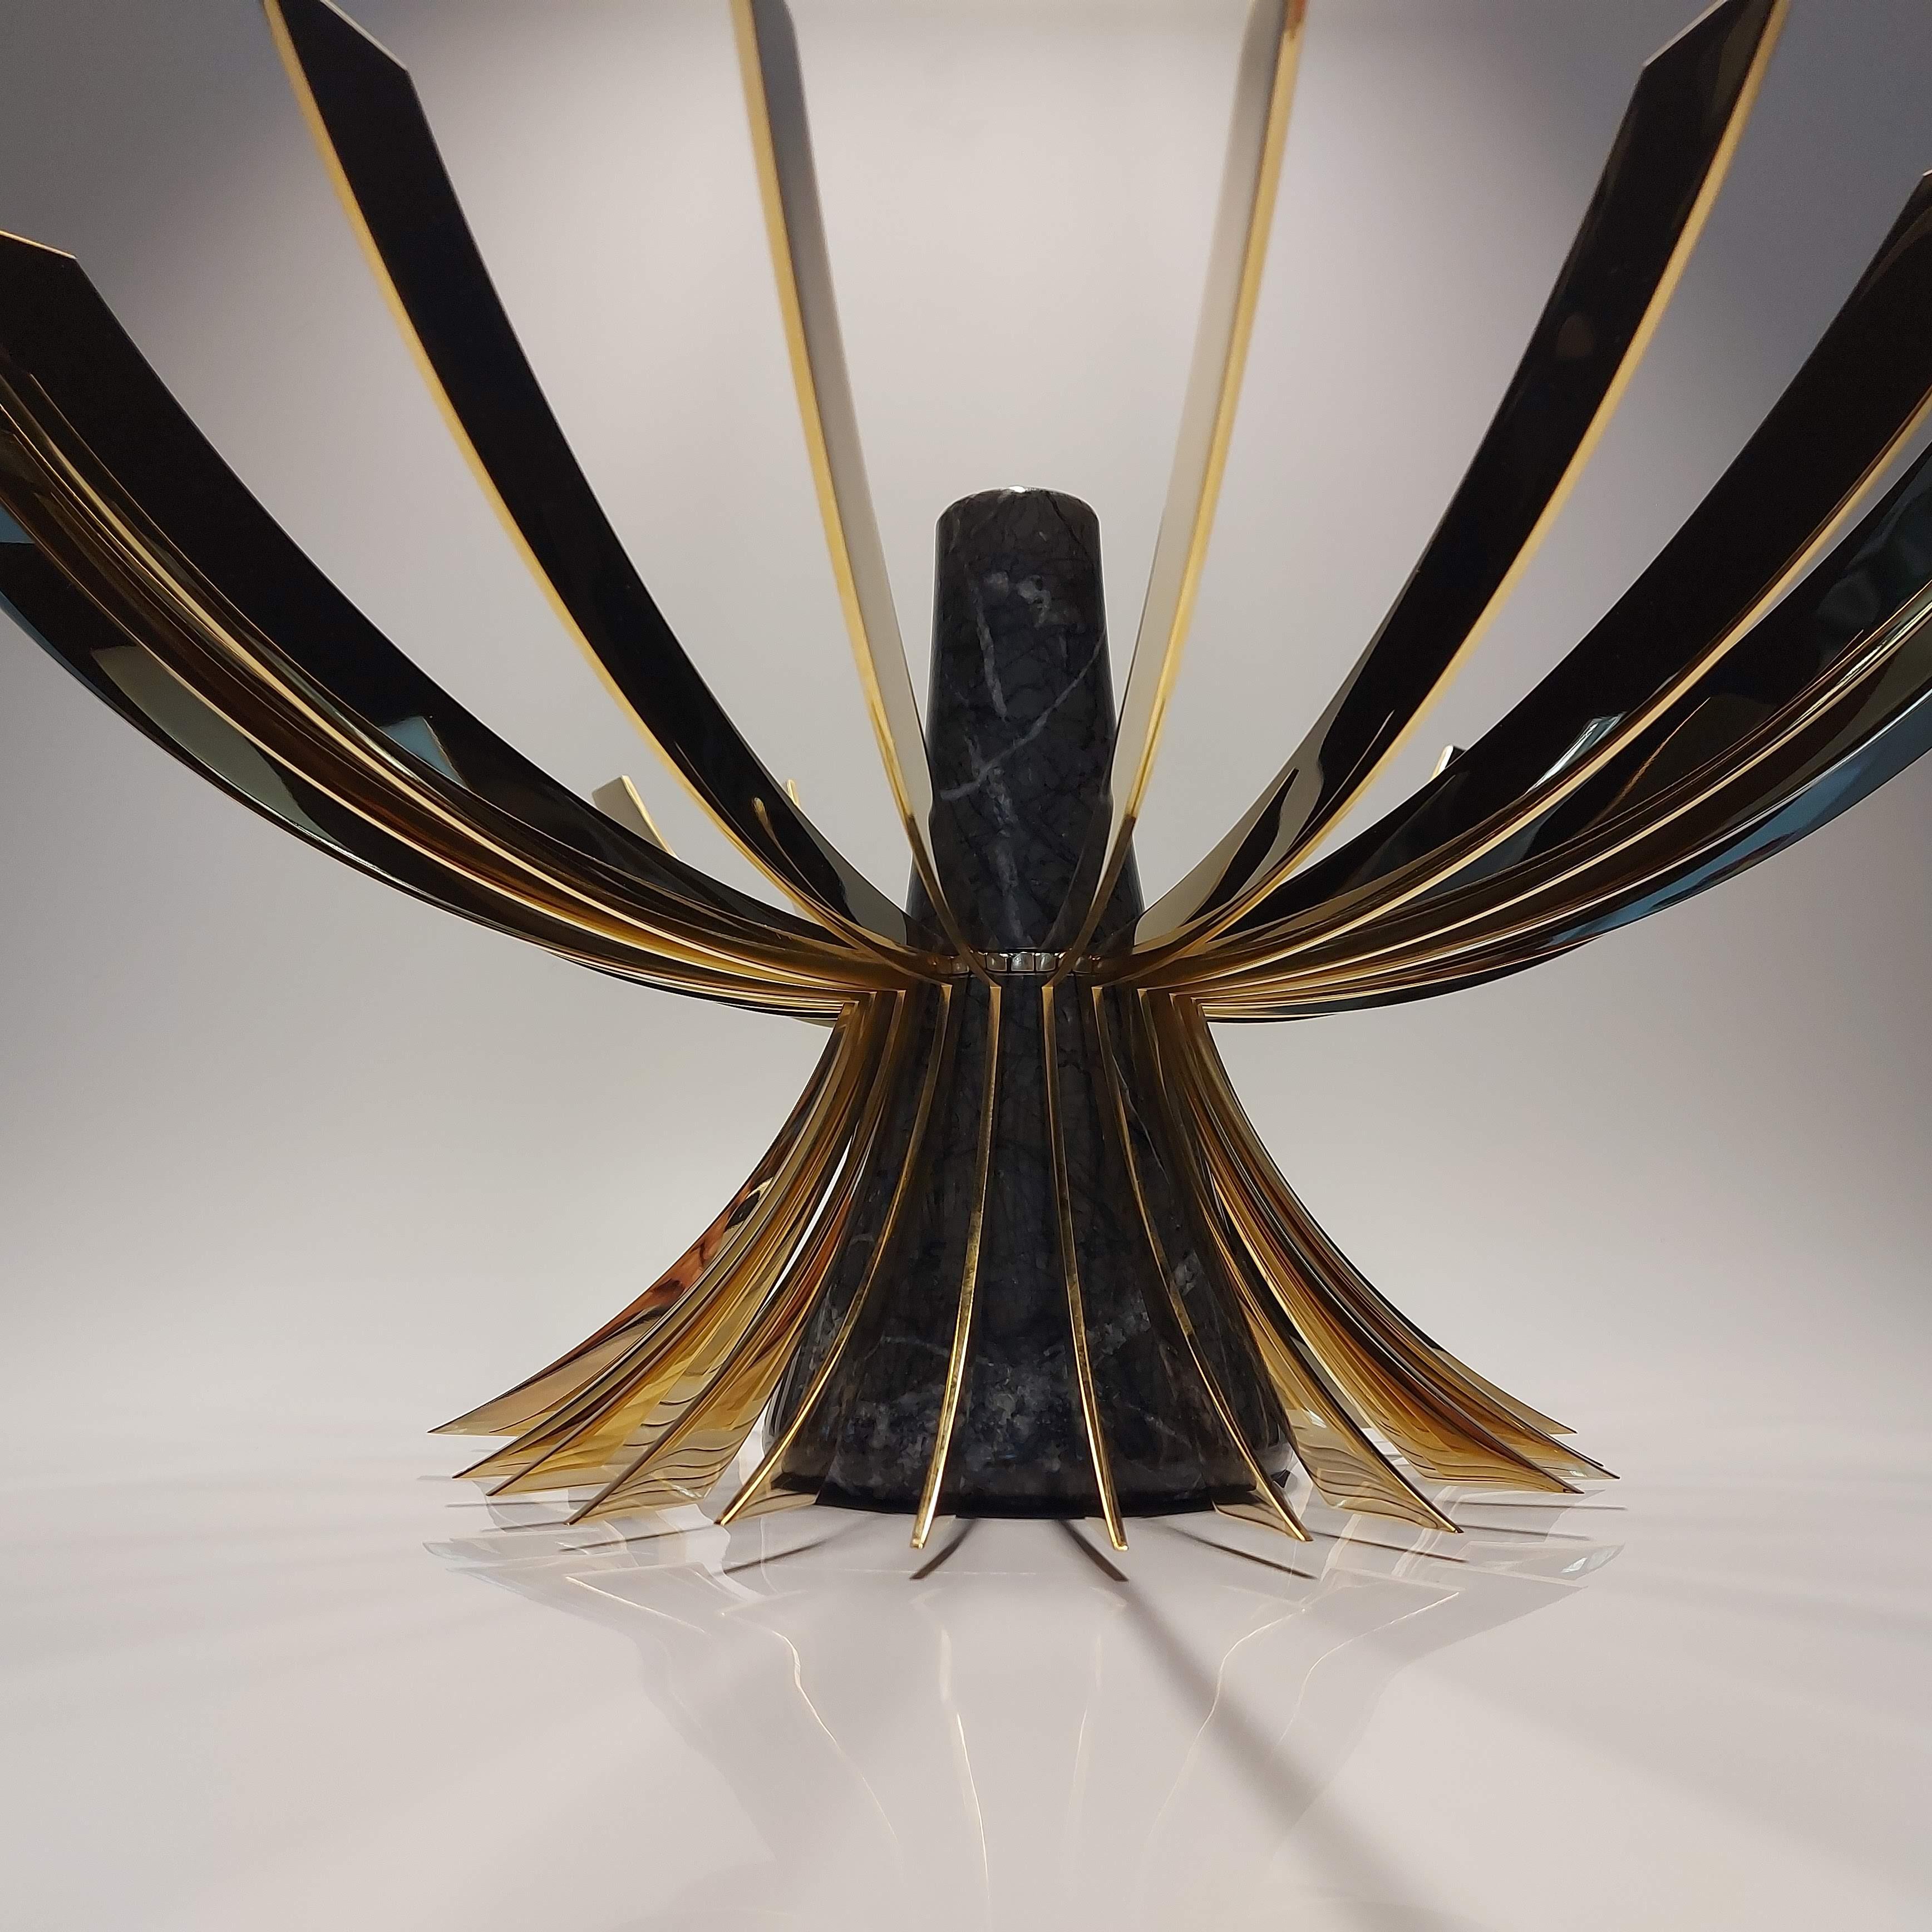 Italian 2K1M - Sagoma Fruit Bowl - Black & Gold - Marble core and Metal 24K Gold Fins. For Sale